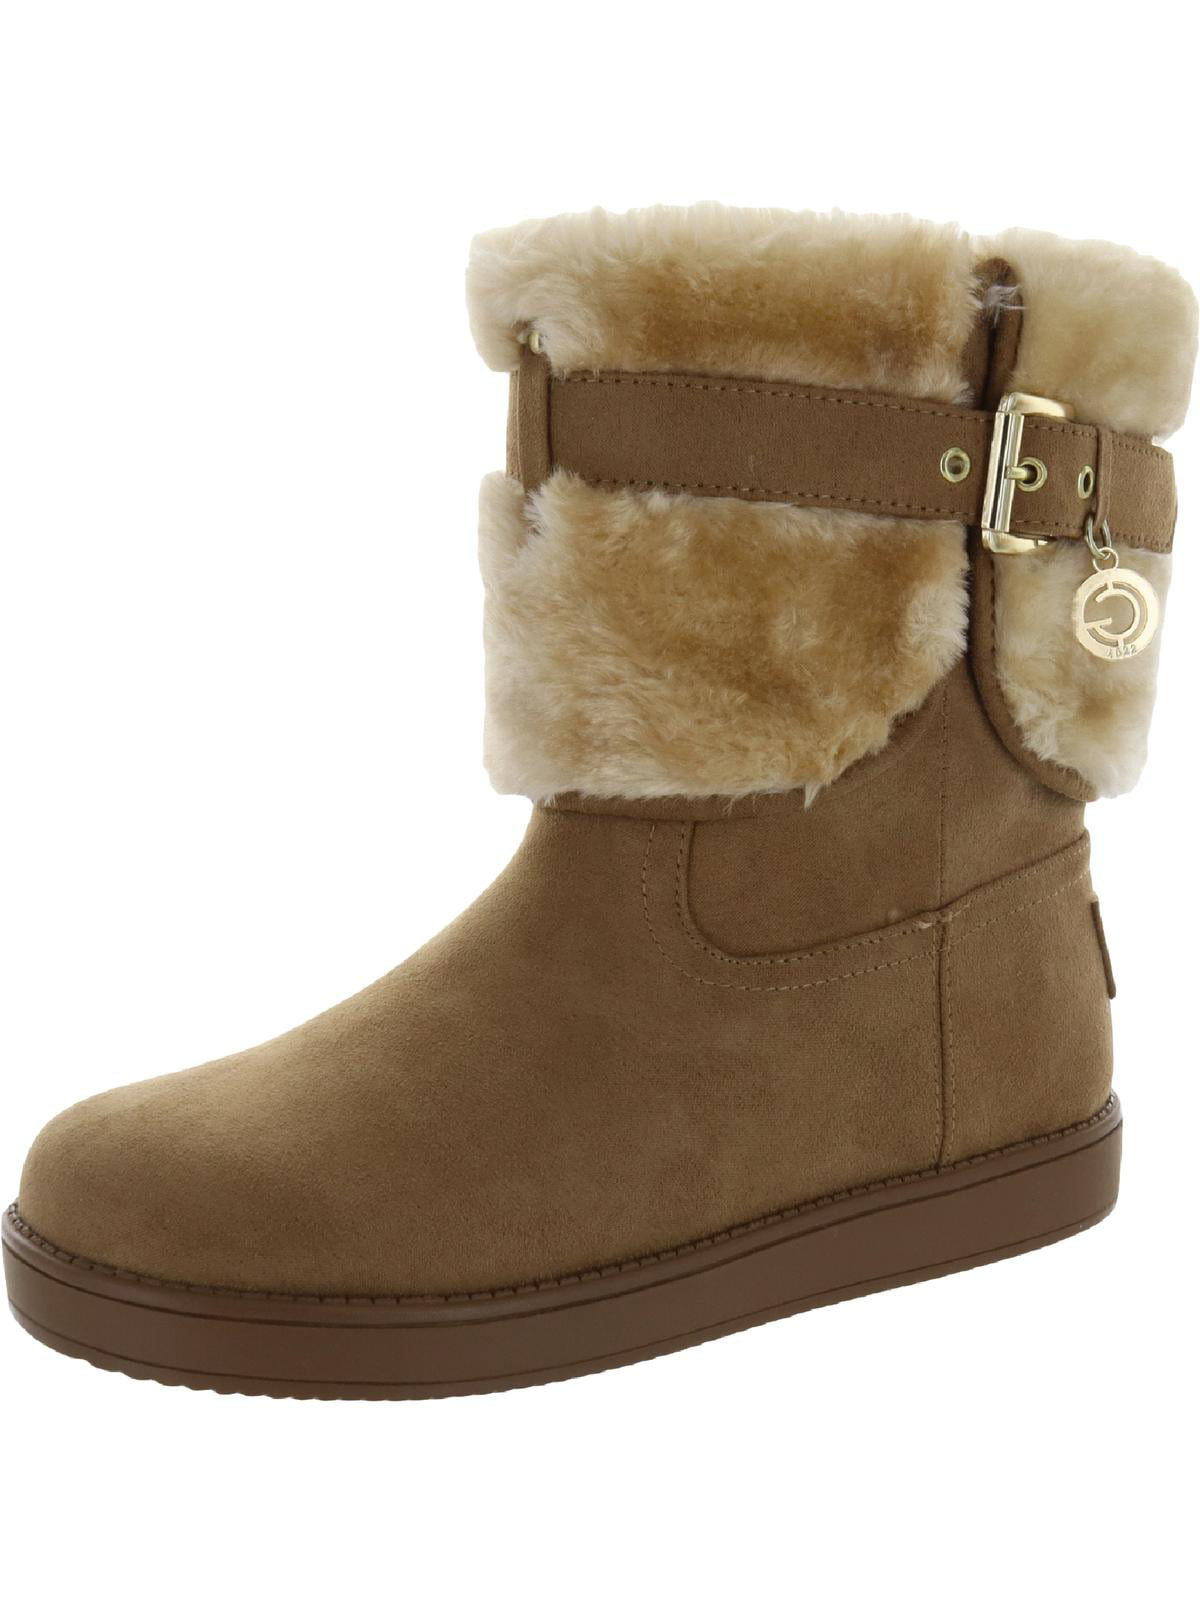 GBG Los Angeles Womens Adlea Faux-Suede Winter & Snow Boots